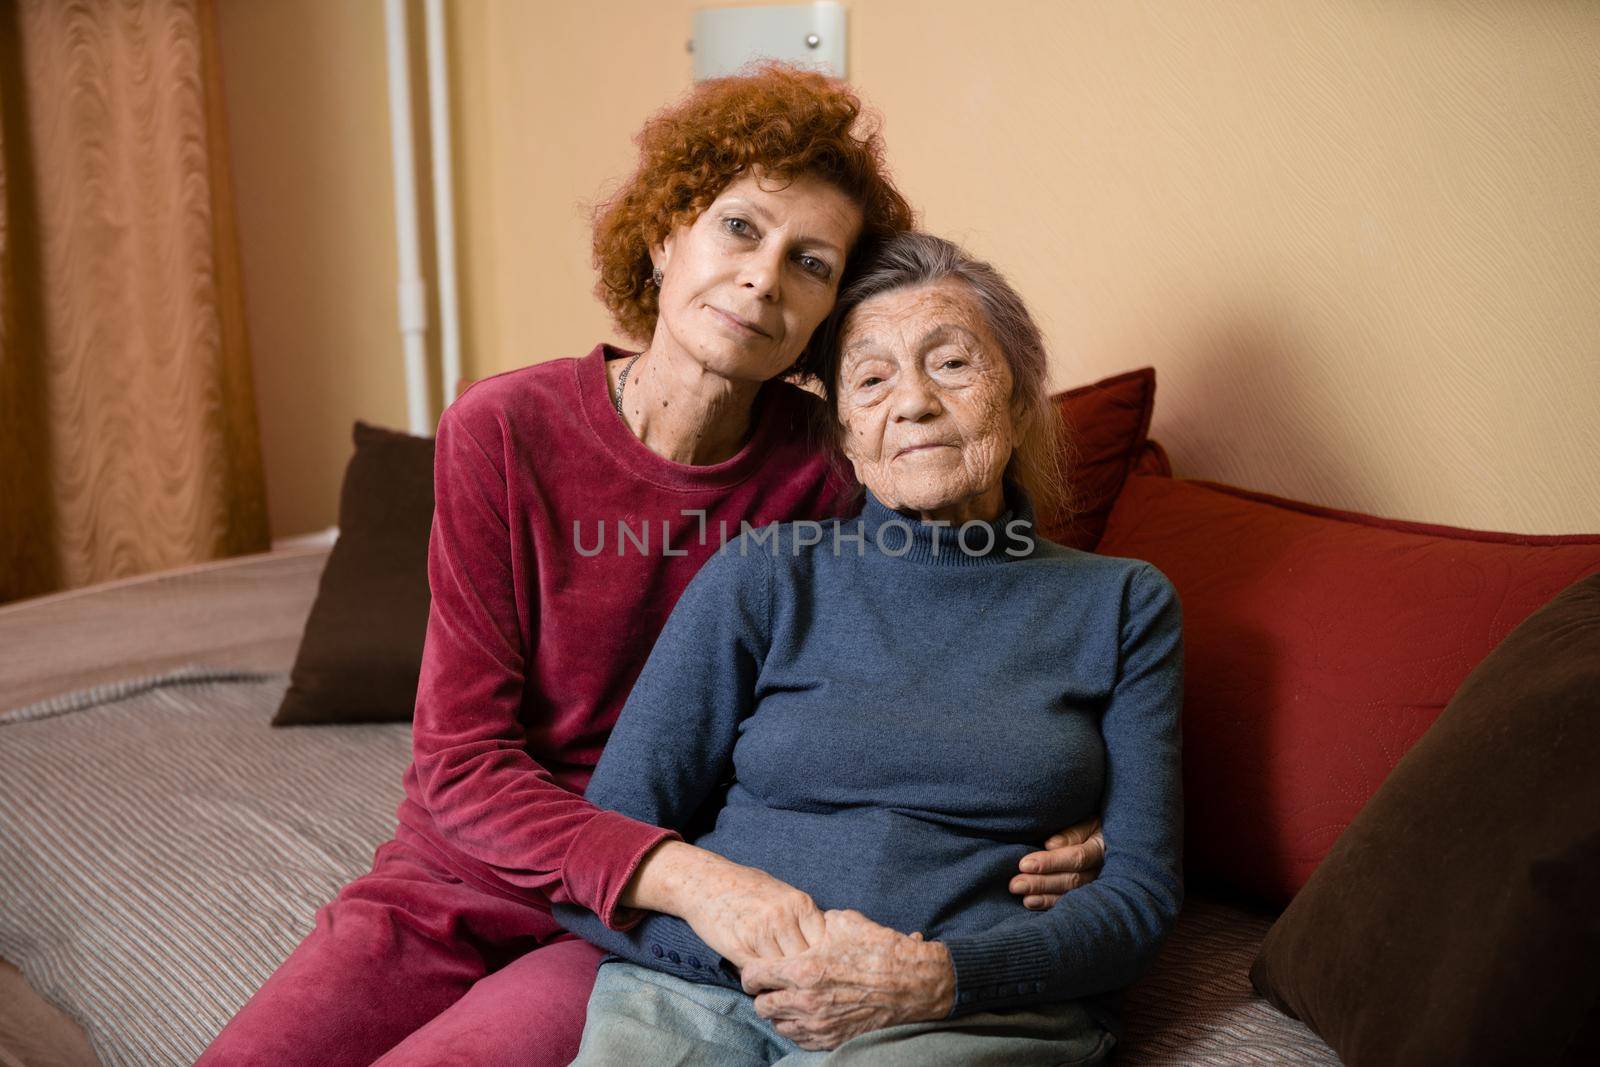 Adult daughter takes care of elderly mother suffering from dementia, old woman ninety years age gray hair and wrinkles on face and sweet kind smile, family idyll caring for elderly, hug each other.